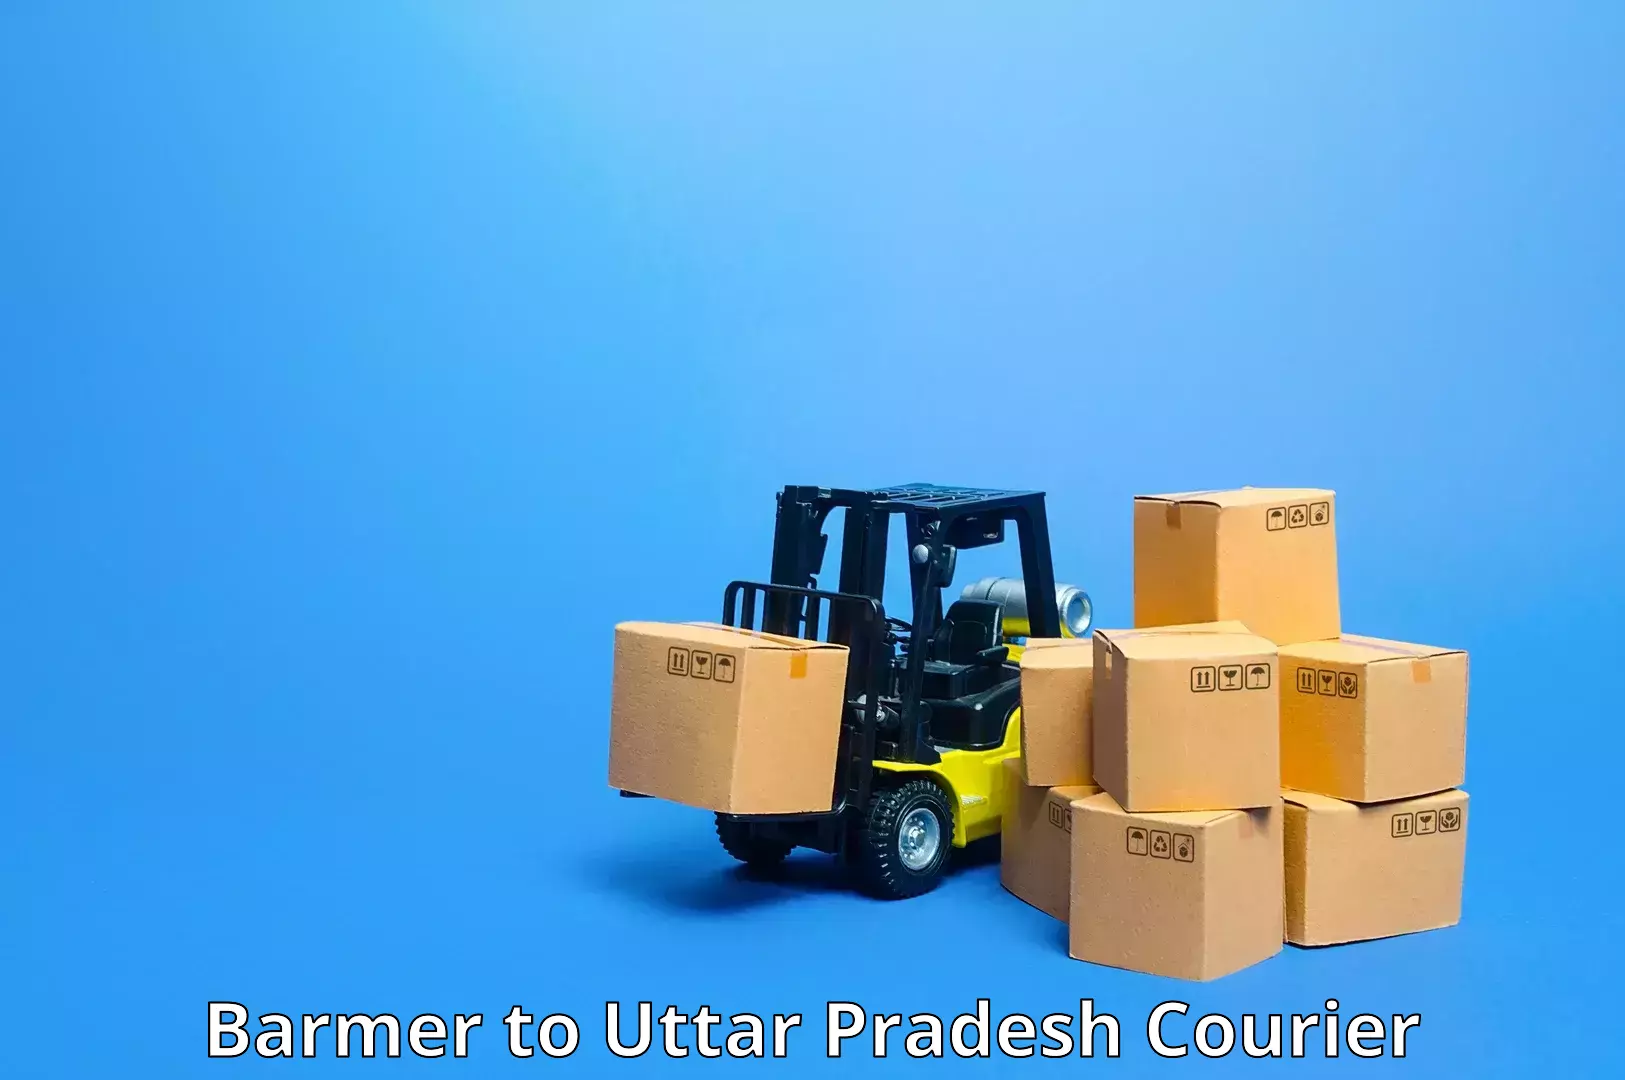 Express logistics service in Barmer to Allahabad